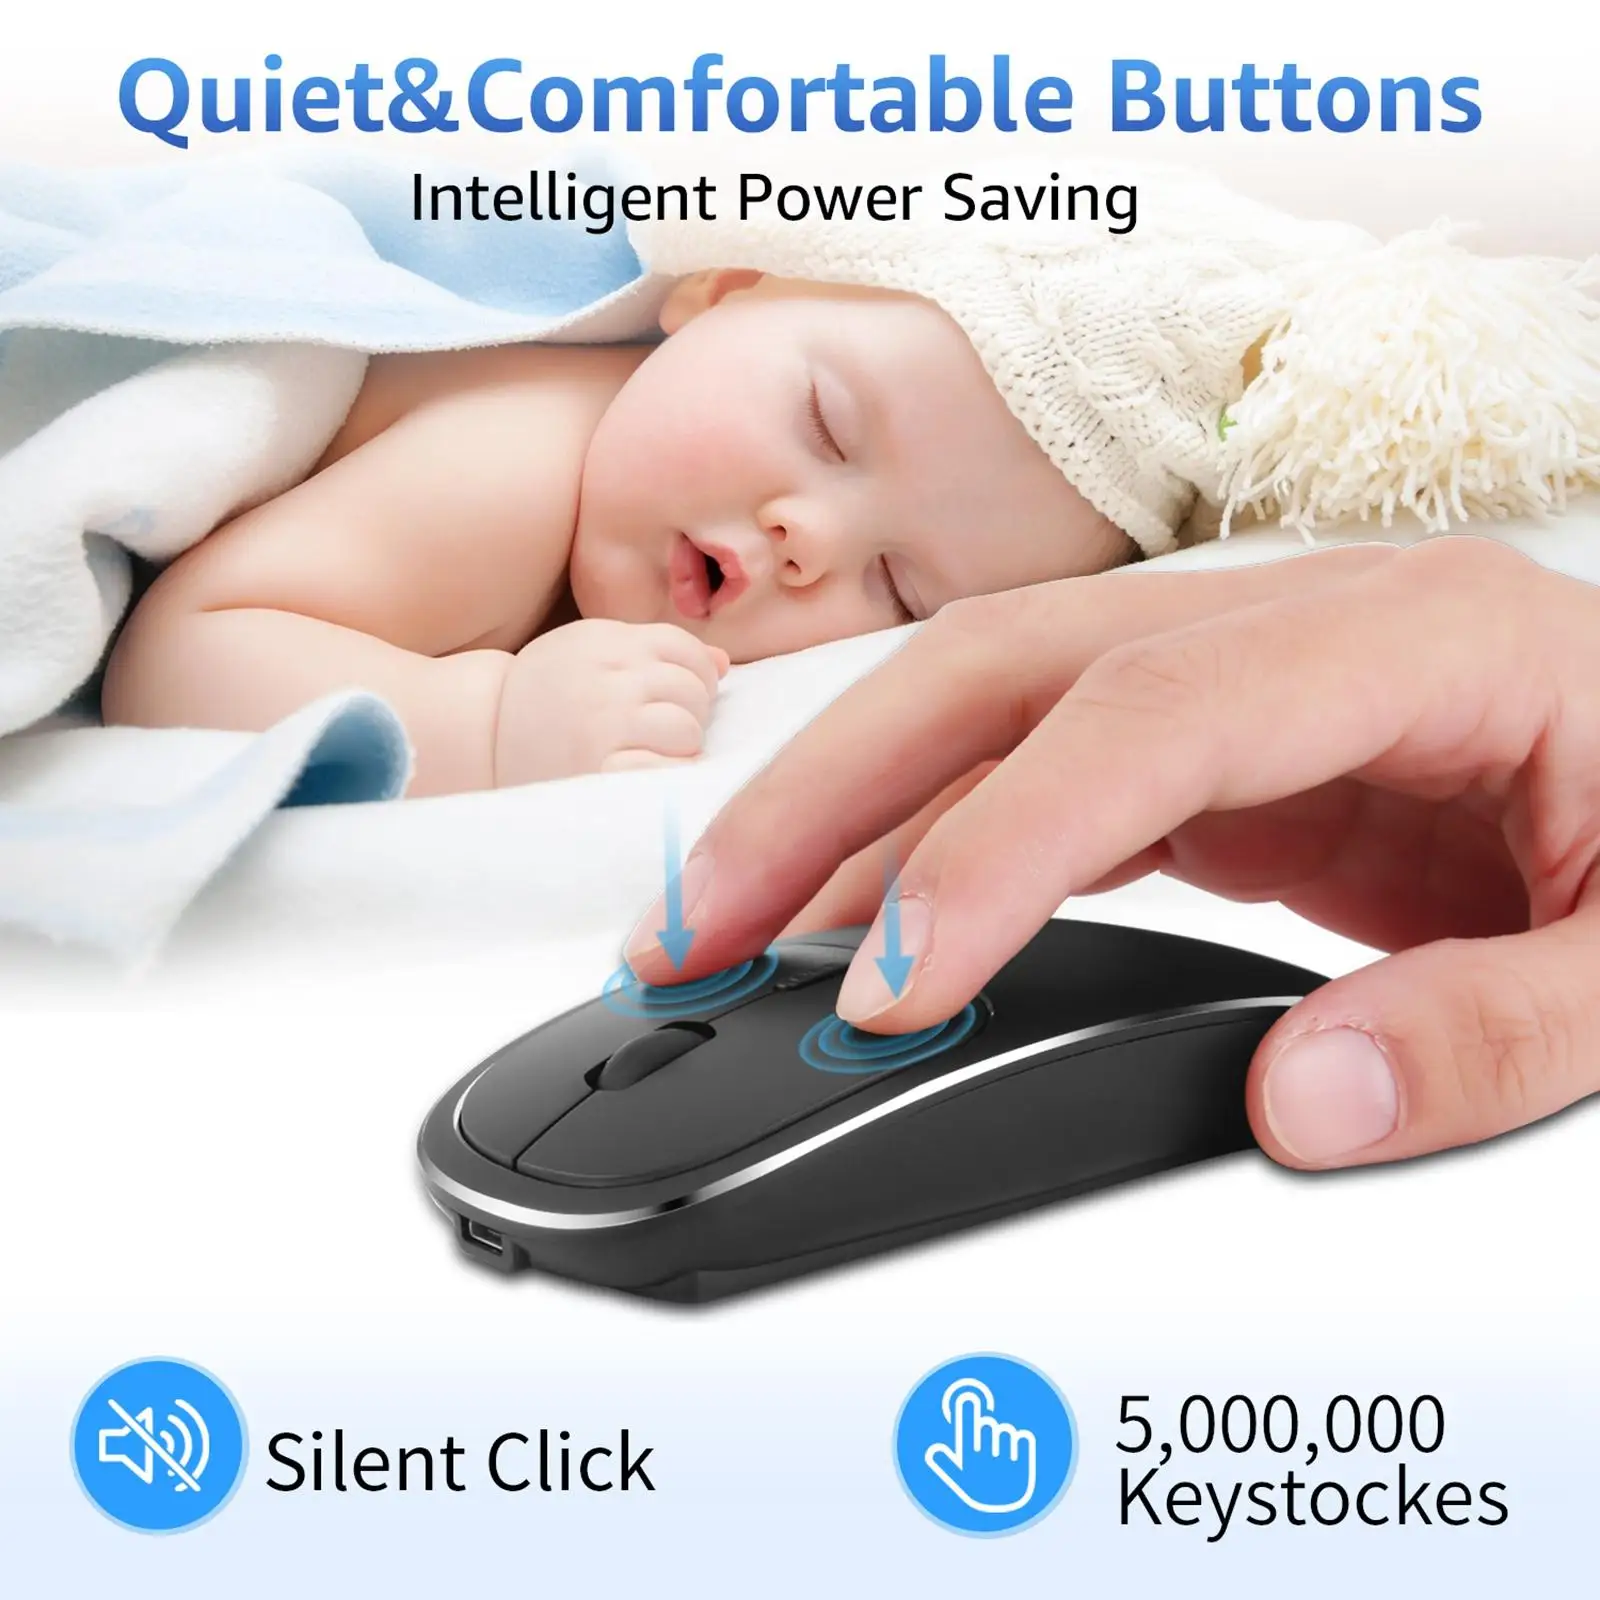 Portable 2.4G Wireless Mouse 1600 DPI Slim Silent Clicking Mice for Computer Tablet Desktop